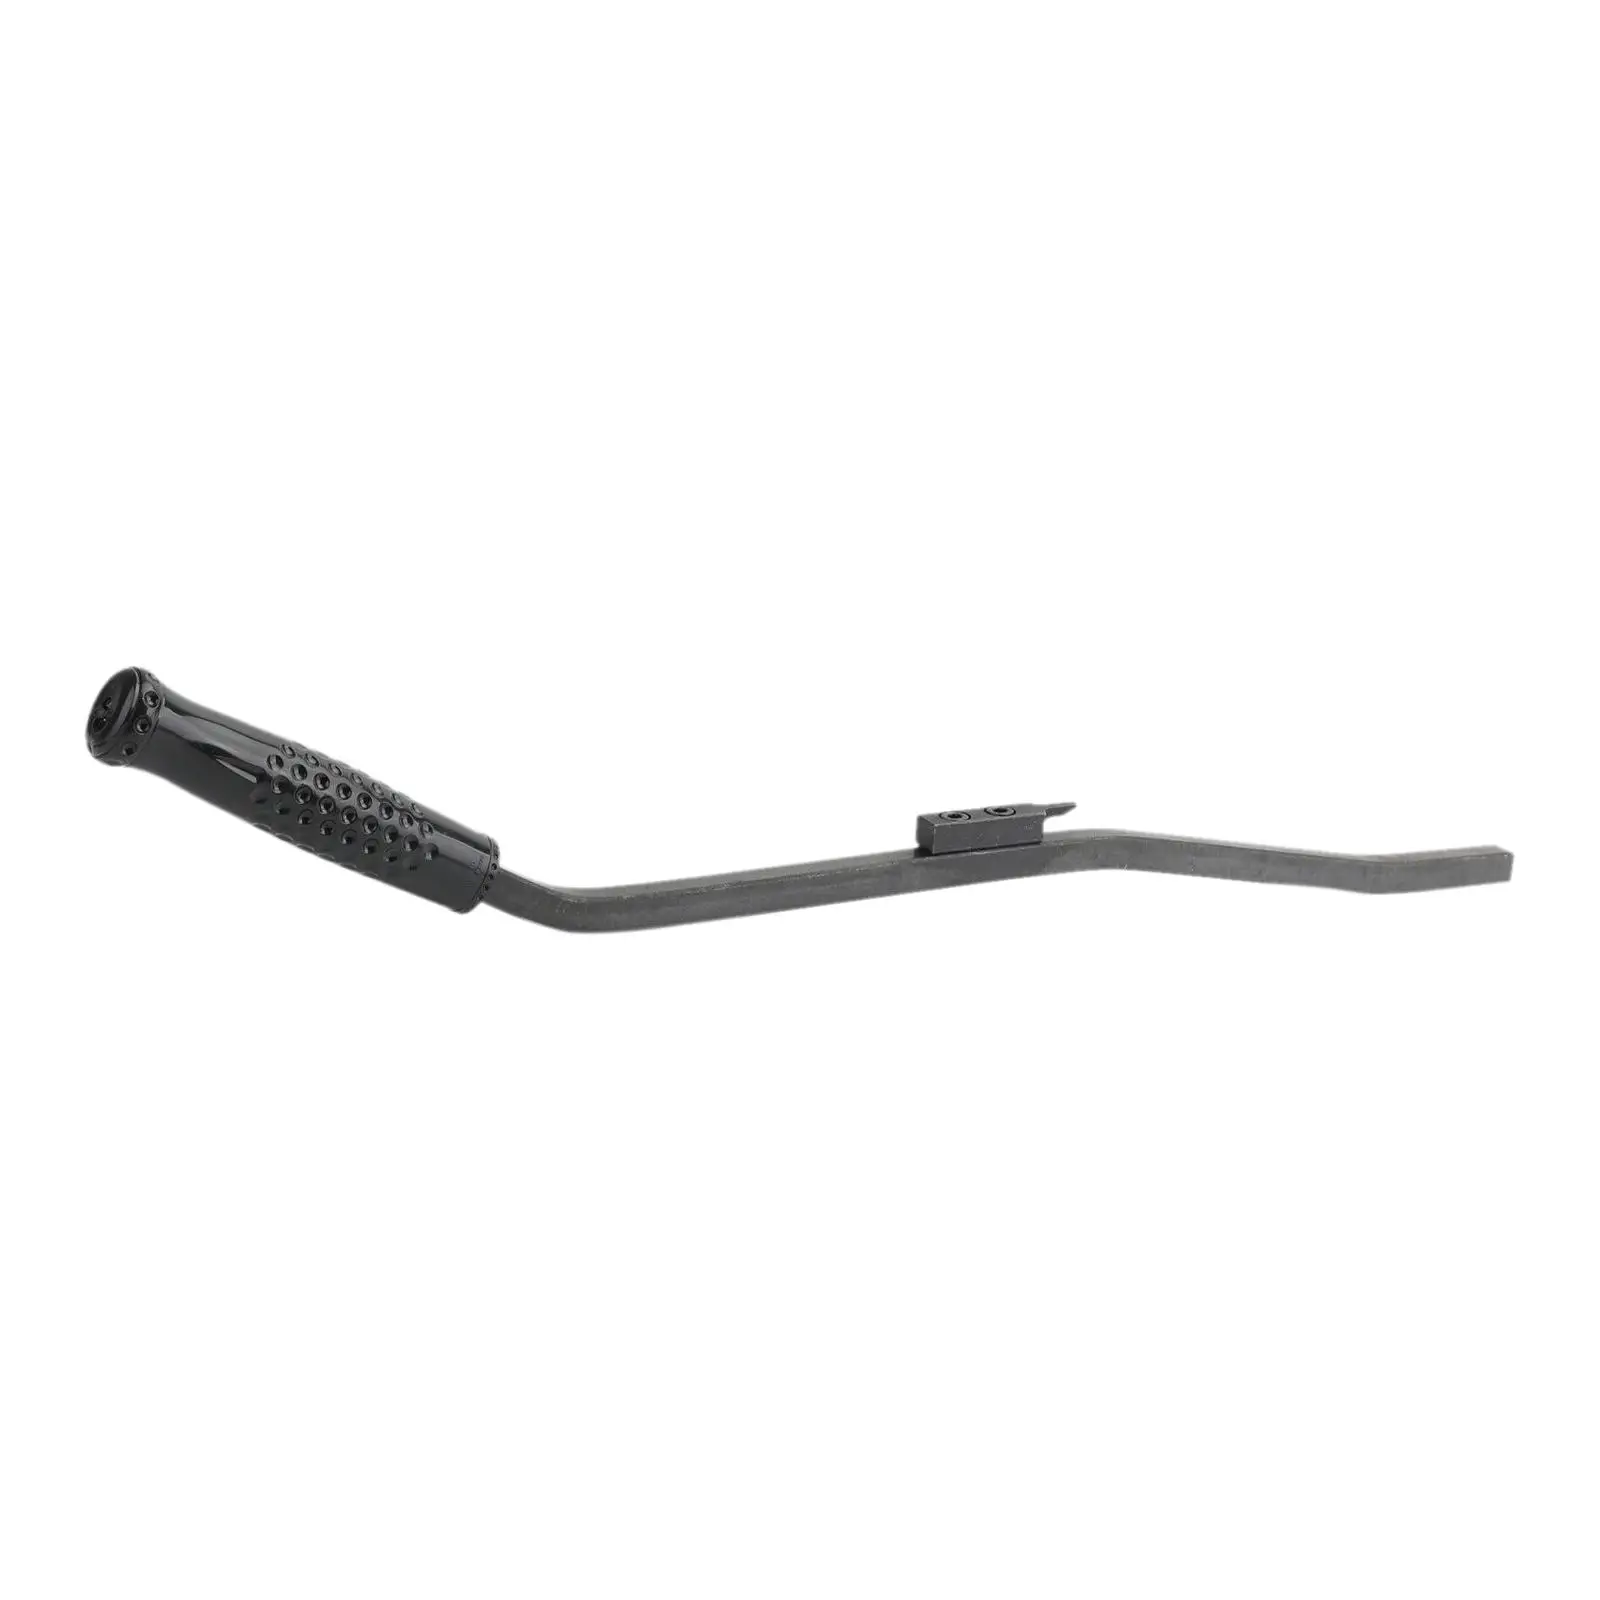 

Air Brake Spring Tool Otc5081 for Tractors and Trailers Trucks Easily Install Made of Heavy Duty Steel Material Accessory